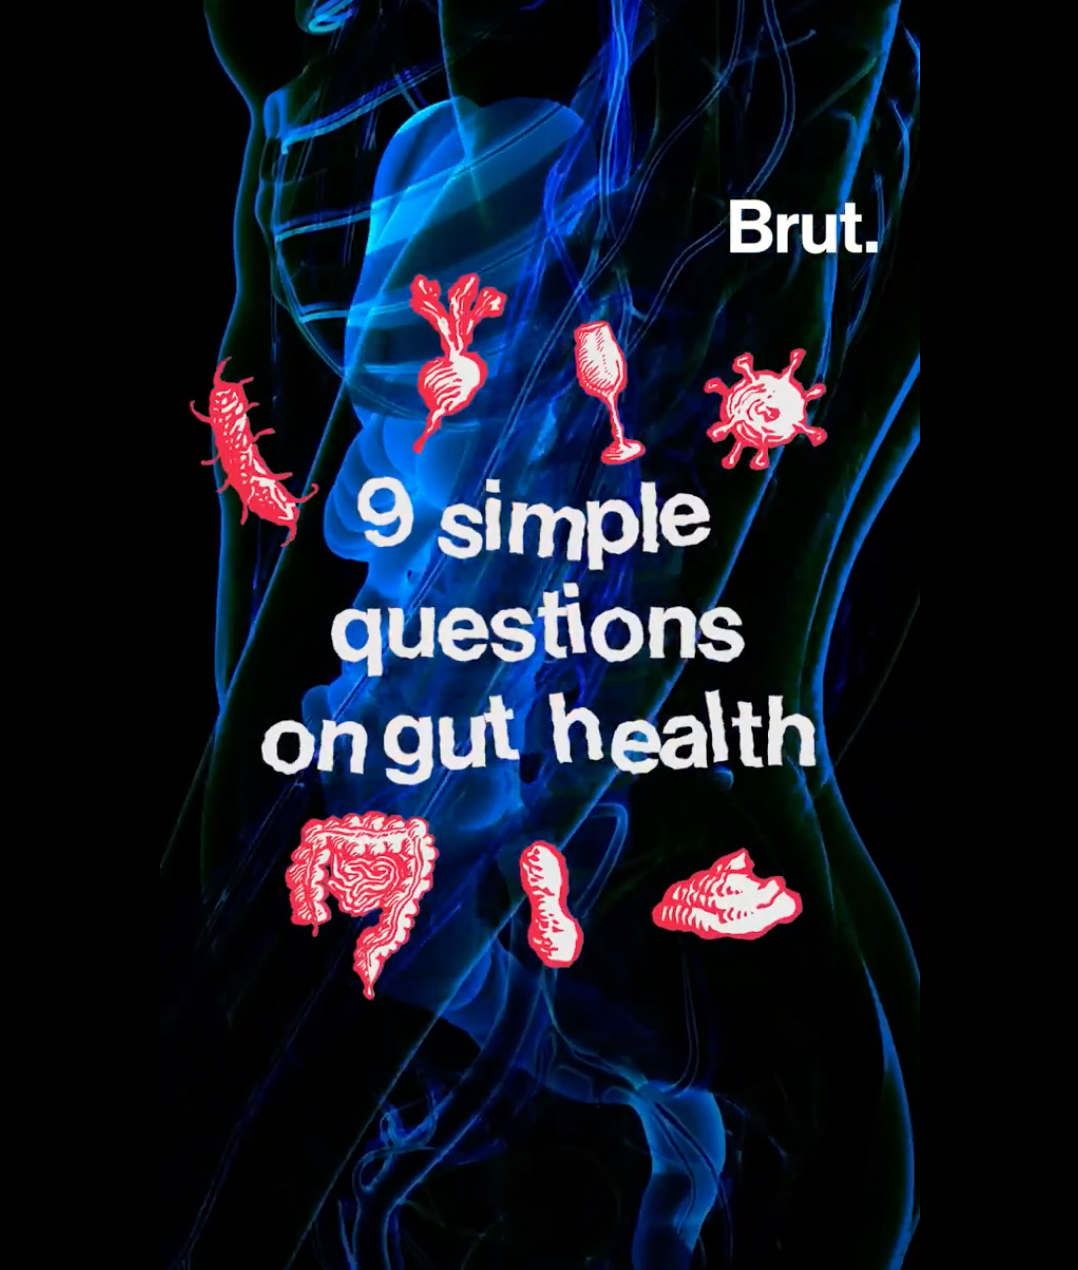 9 simple questions about our gut health